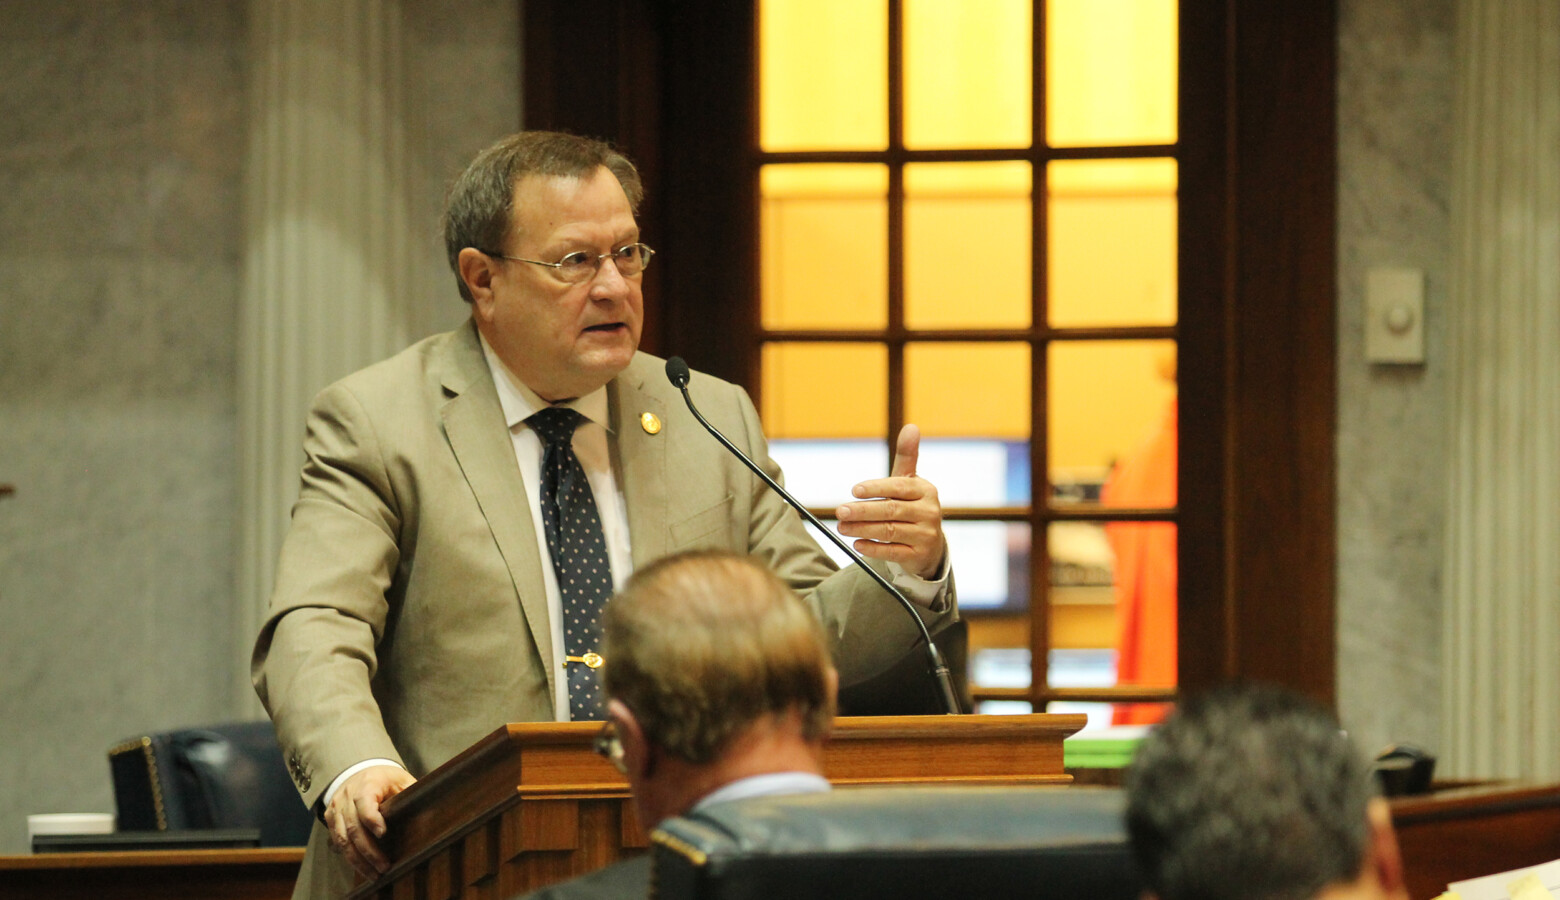 Sen. Mike Young said there are examples from across the country where prosecutors announced they categorically won't charge people for certain crimes. (Lauren Chapman/IPB News)